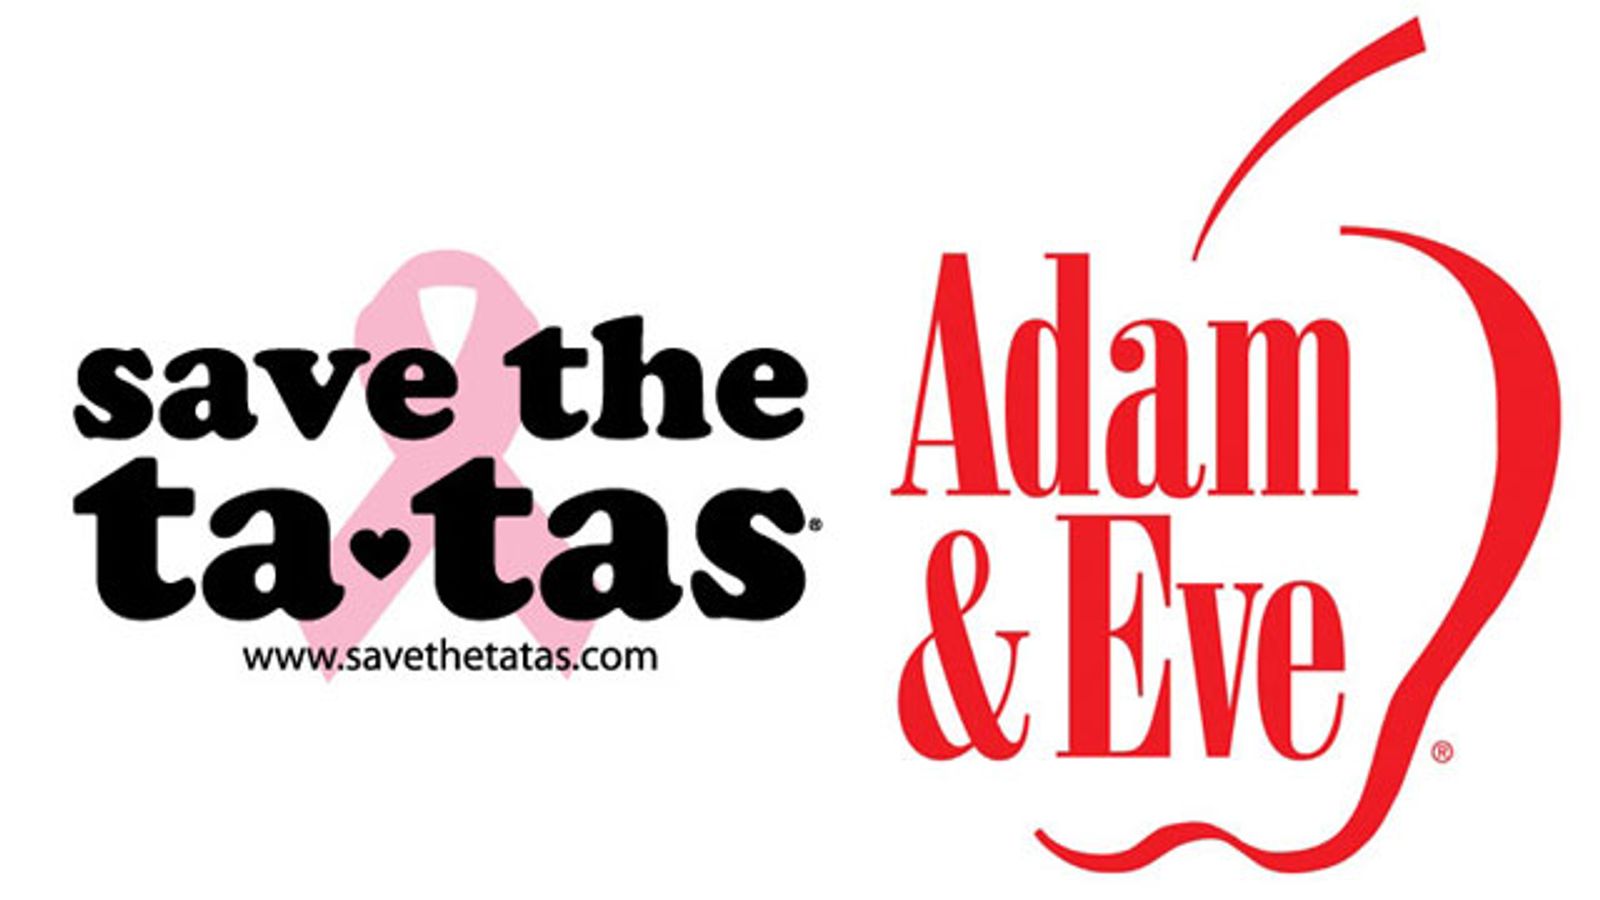 Adam&Eve Raises Funds for Cancer Research with Auction